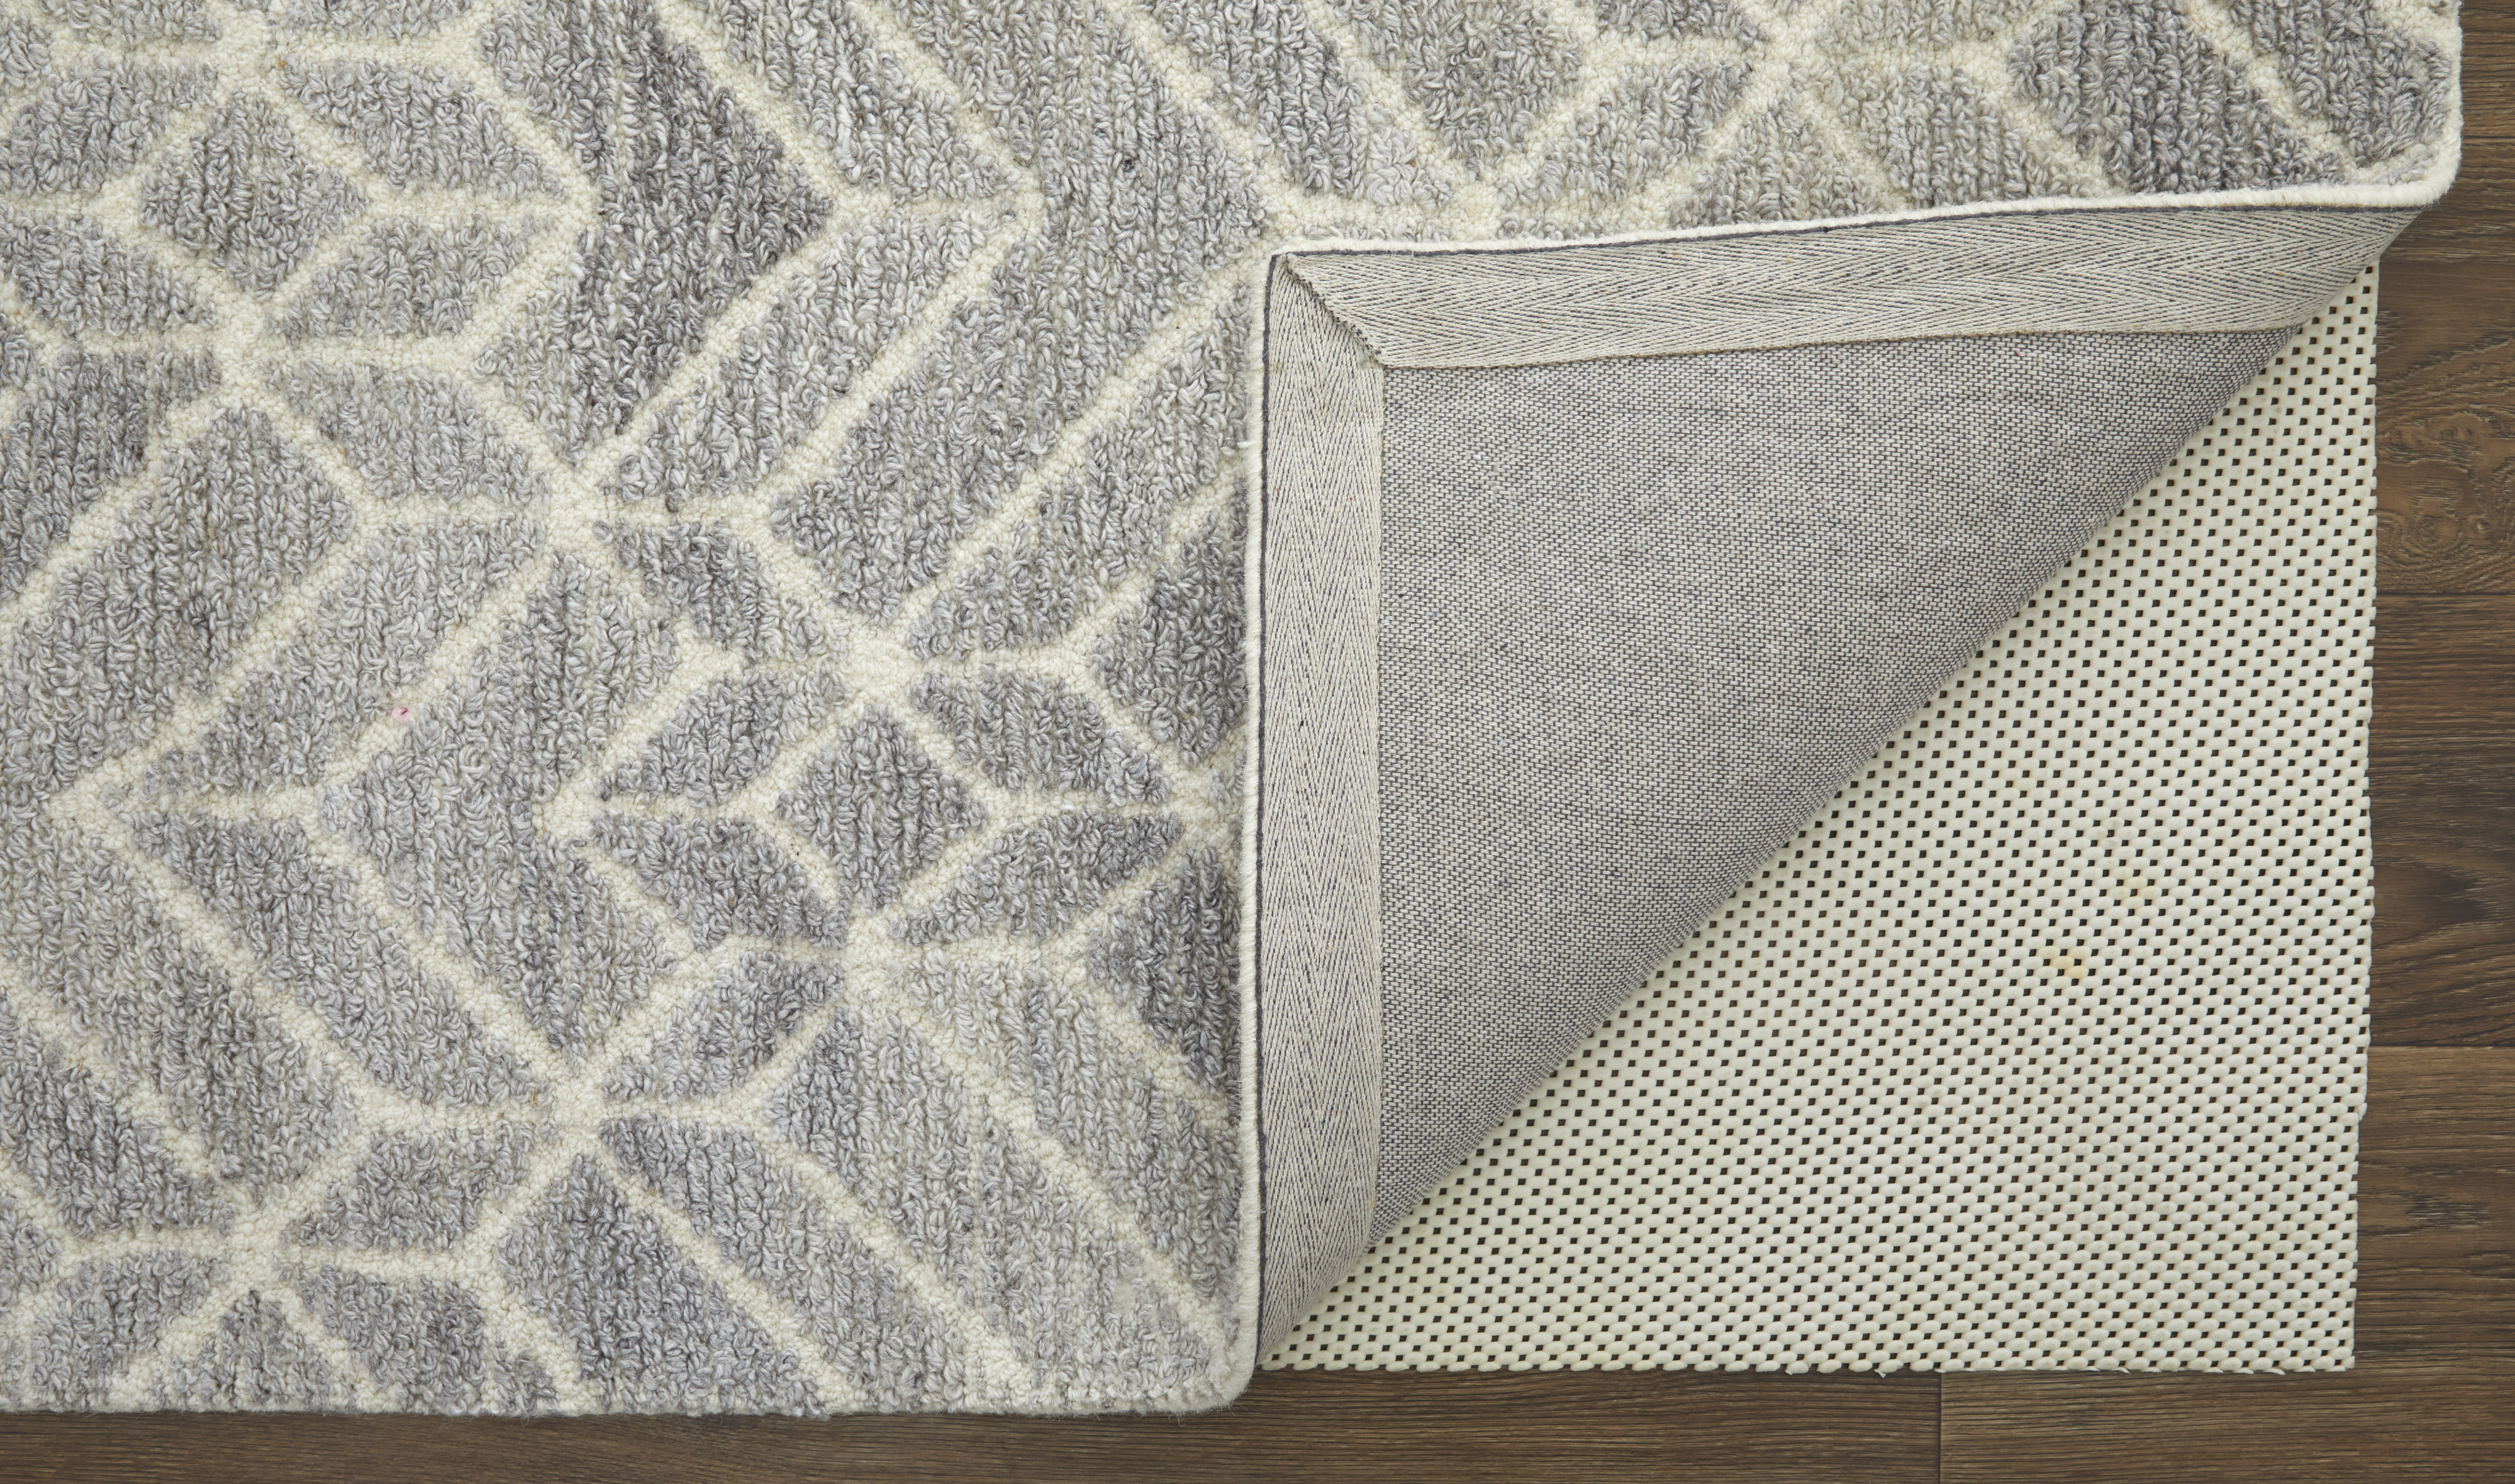 Feizy - Asher Industrial Geometric, Taupe/Gray/Ivory, 2' x 3